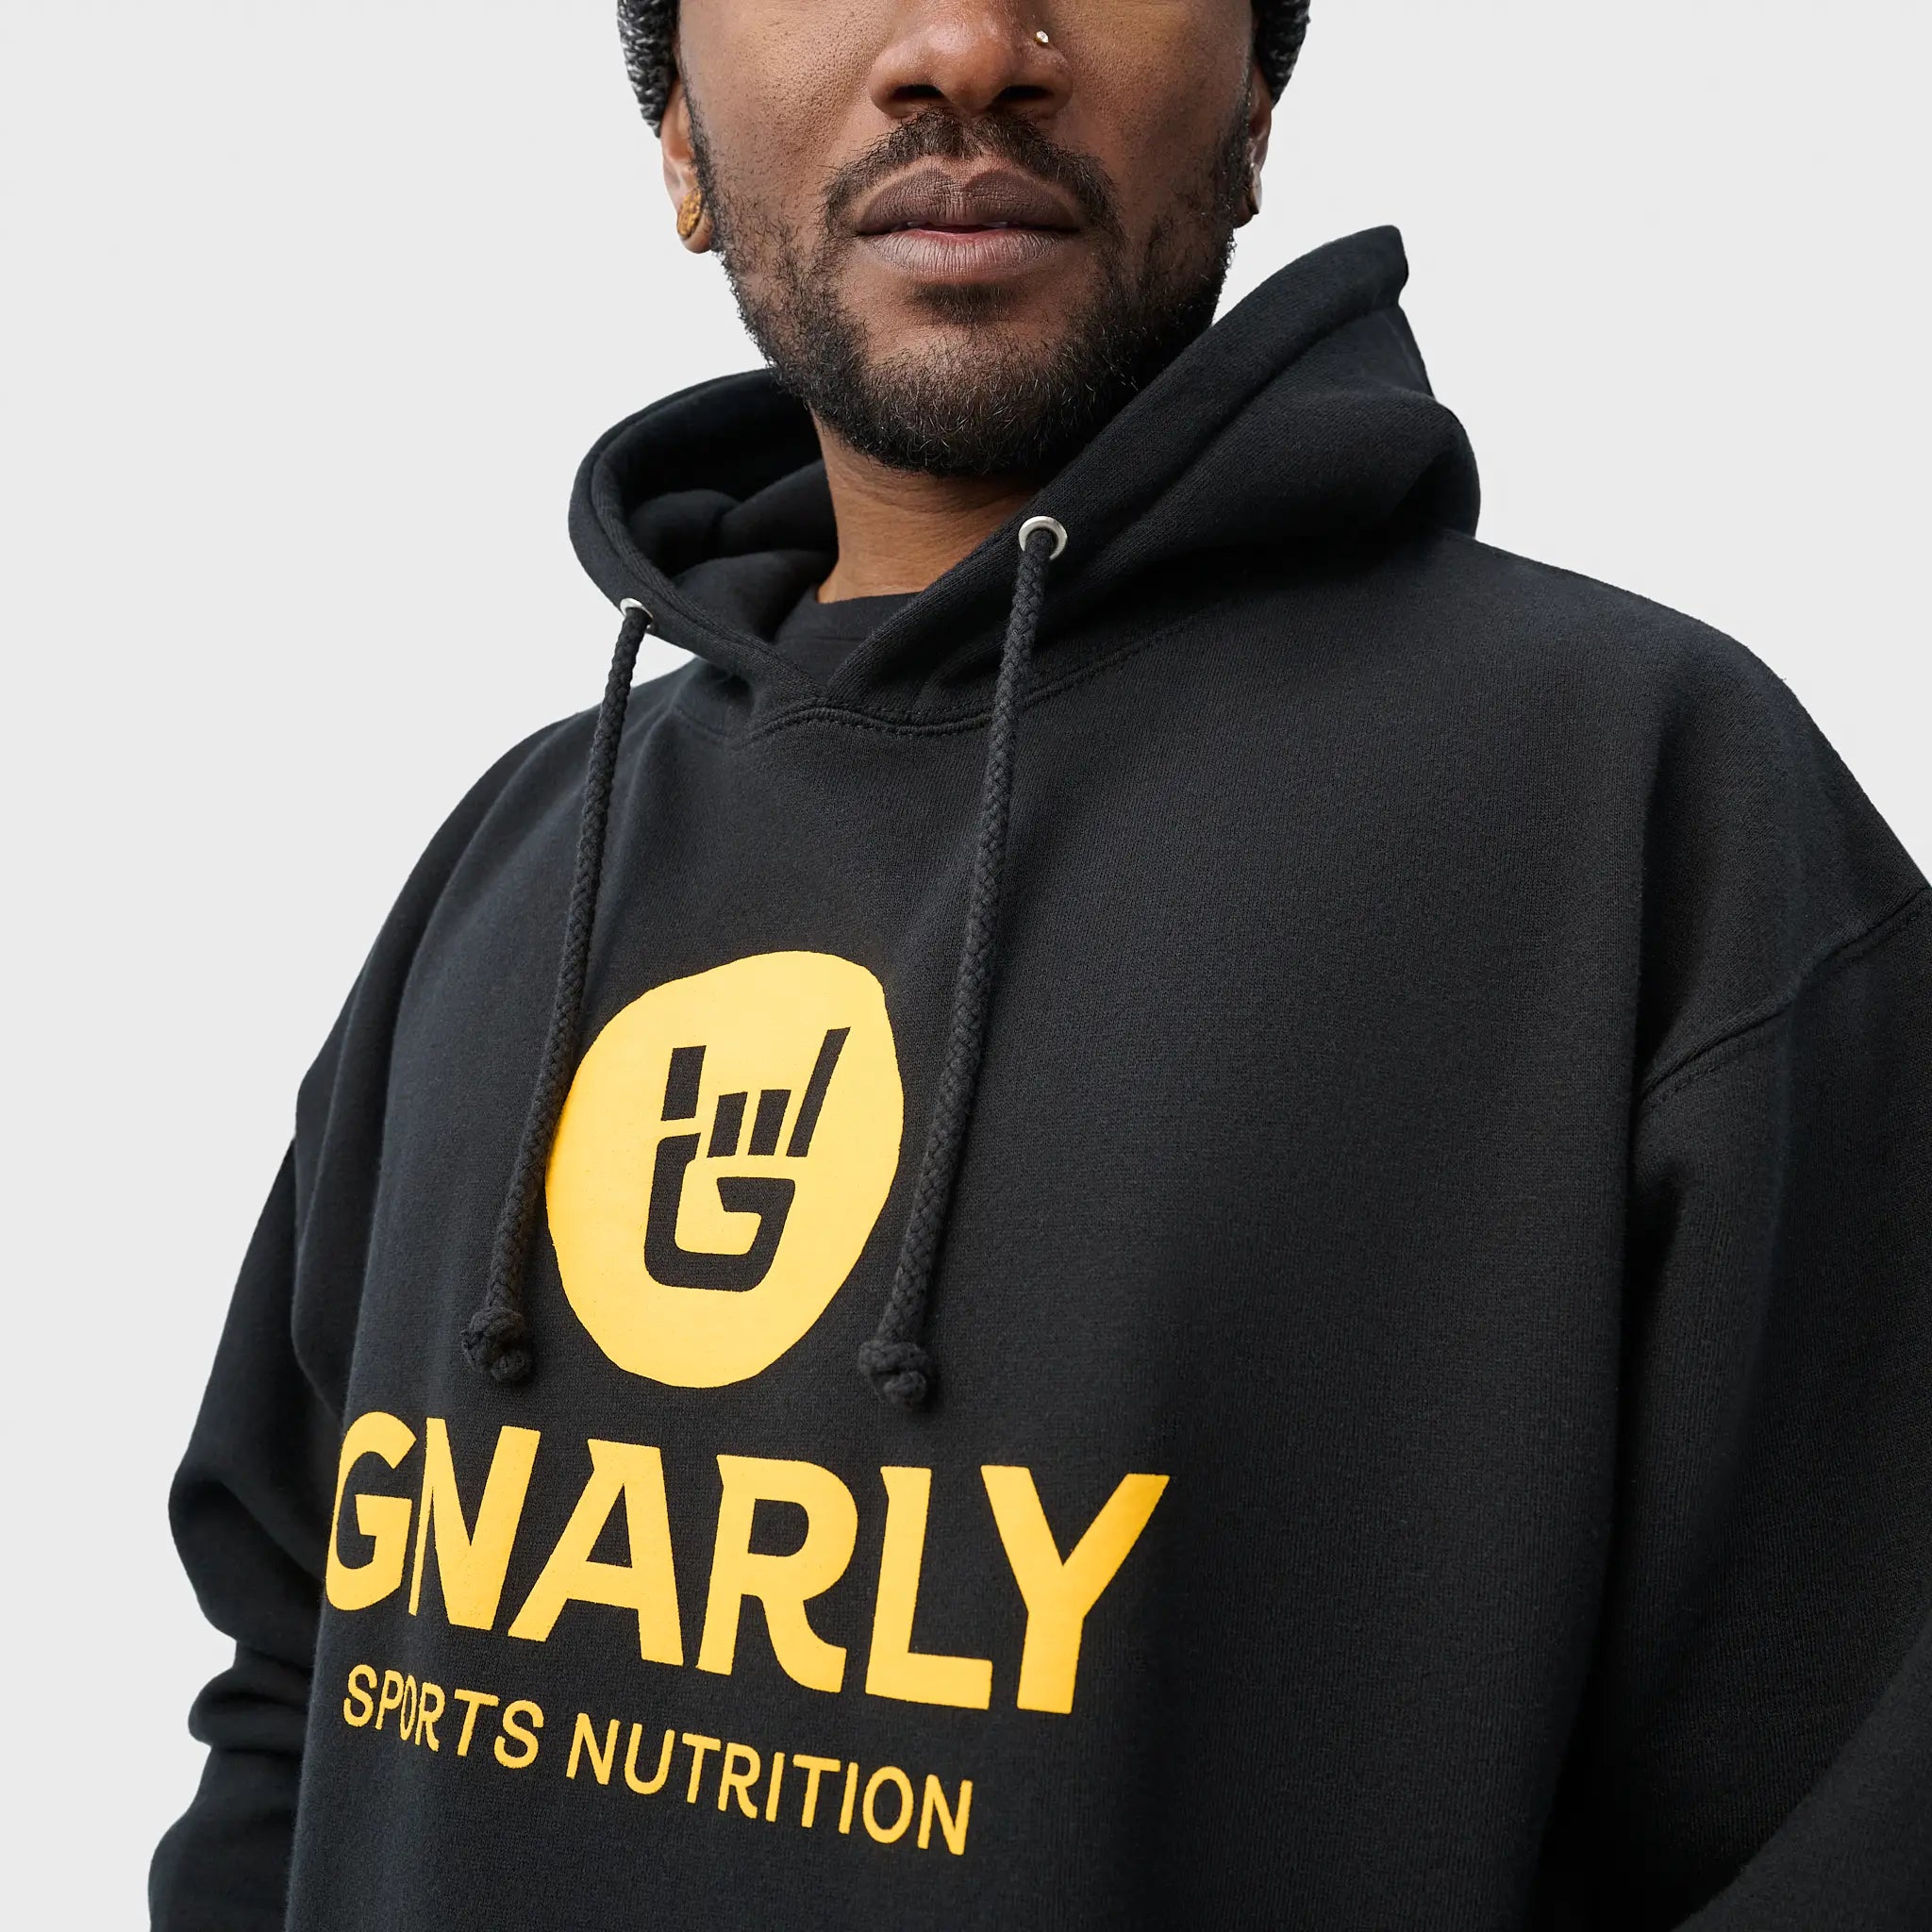 Gnarly Black & Yellow Hoodie - Gnarly Nutrition